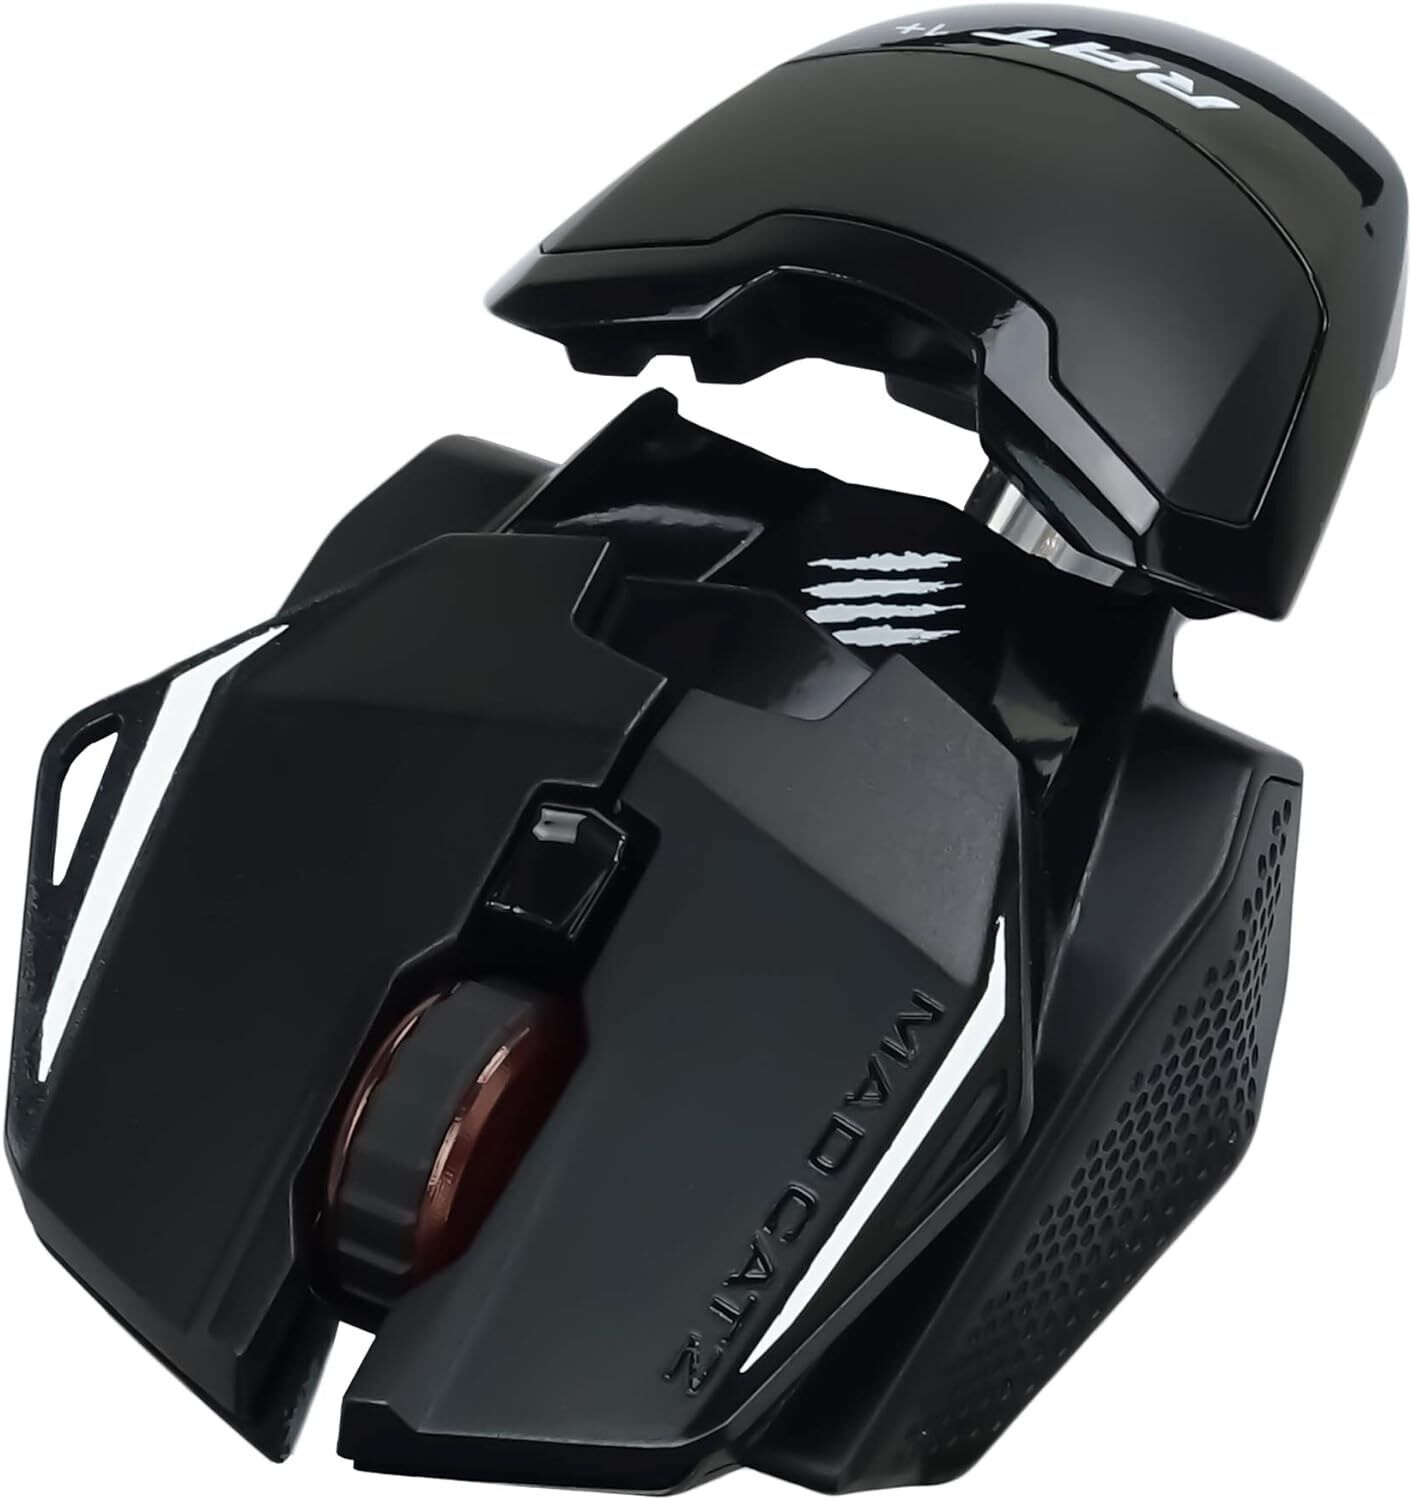 Mad Cats Gaming Mouse MR01MCINBL000-0J Black [Optical / 3 Buttons / USB / Wired]